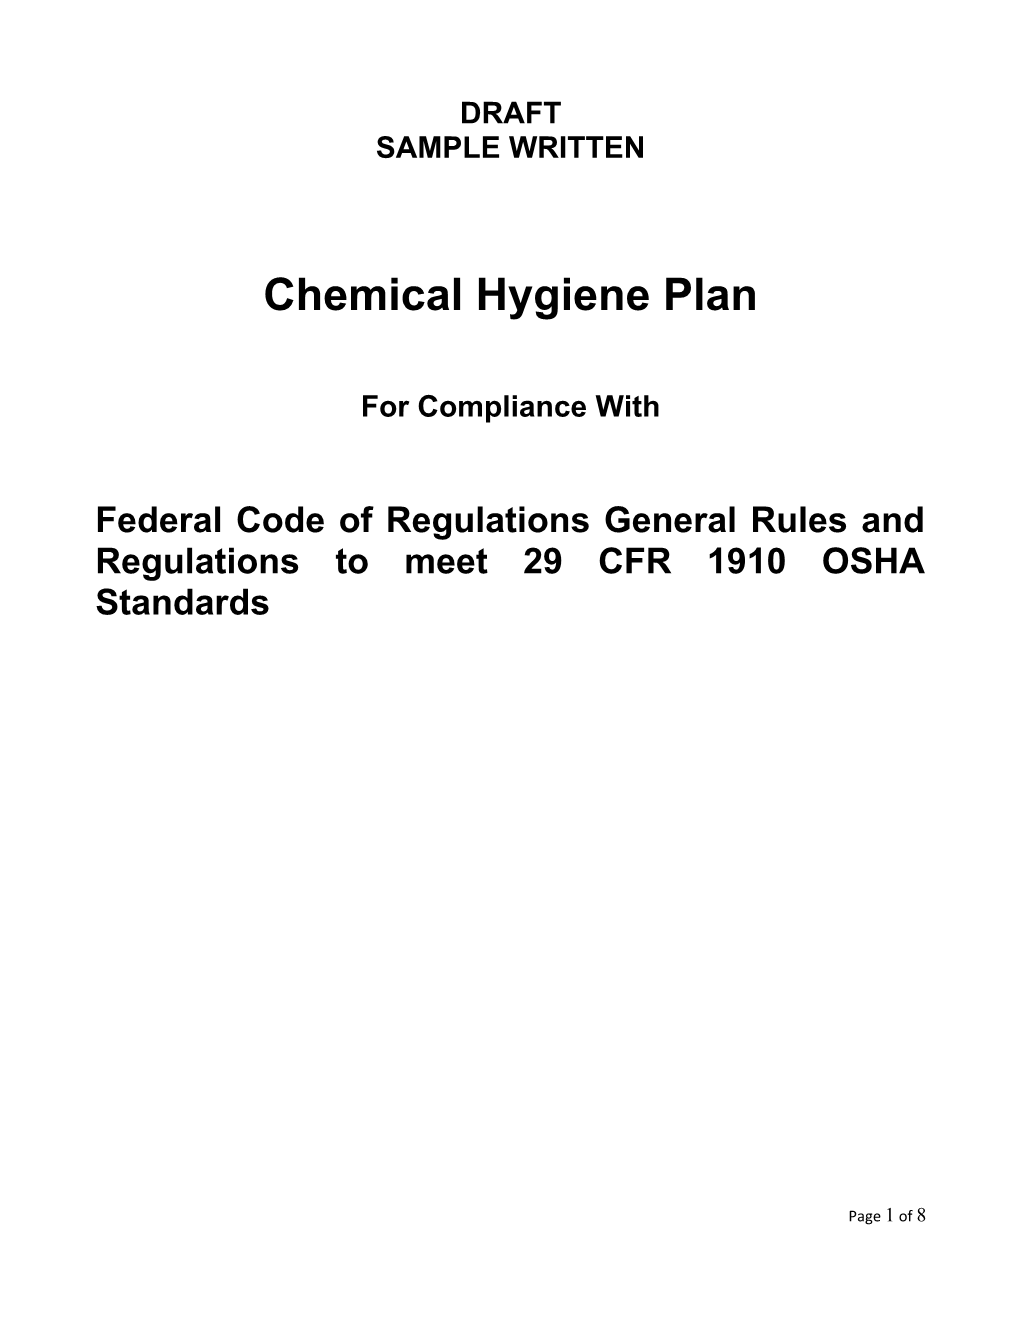 Federal Code of Regulations General Rules and Regulations to Meet 29 CFR 1910 OSHA Standards